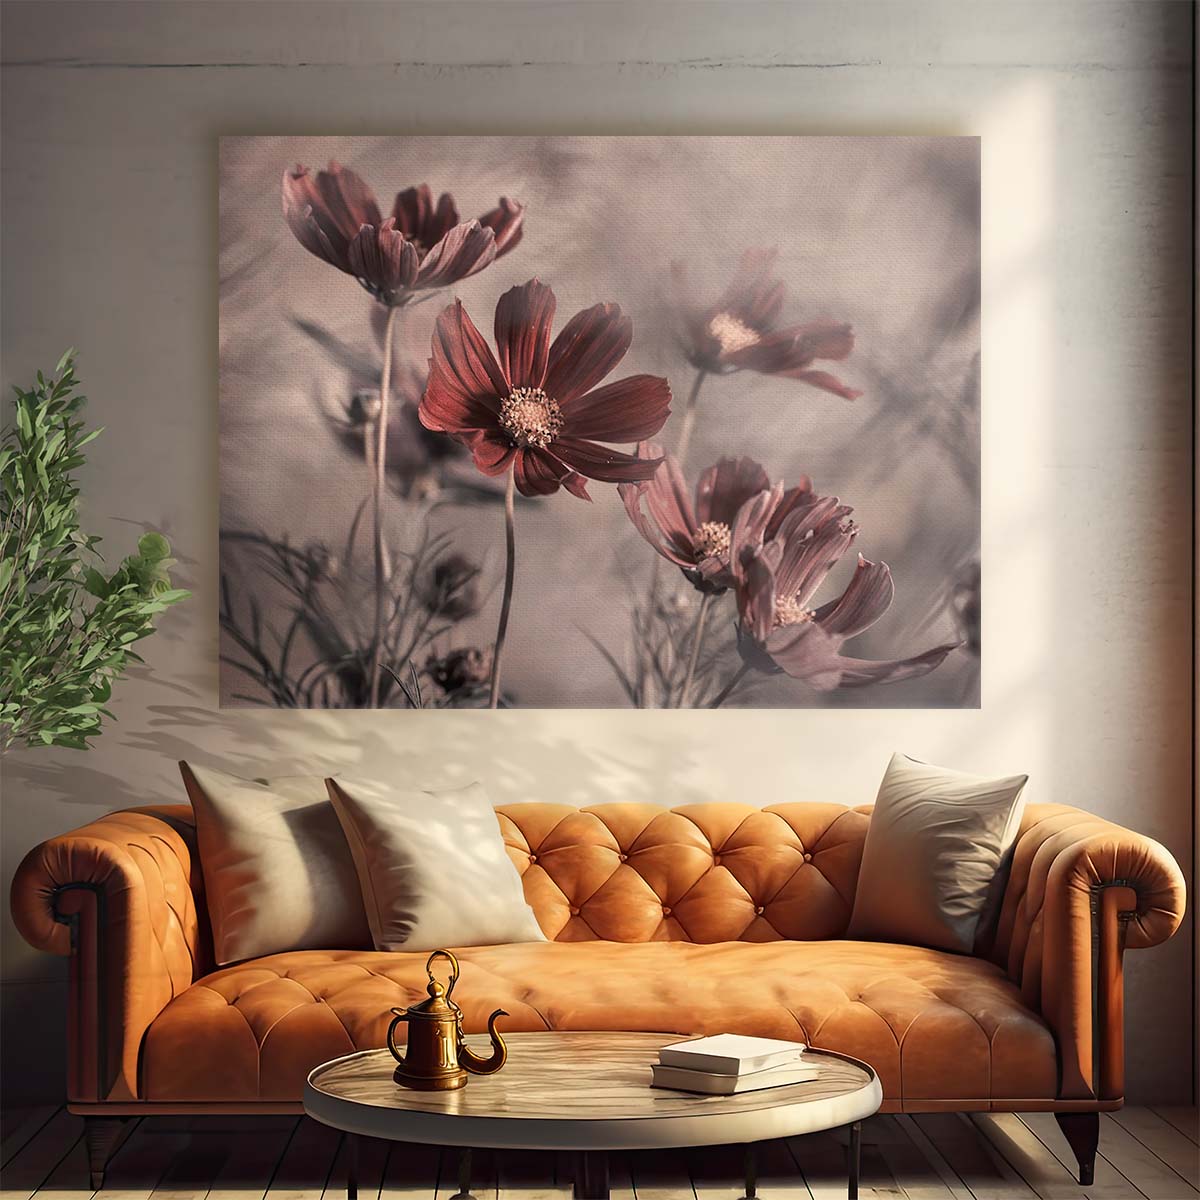 Stunning Macro Pink Cosmos Floral Bokeh Wall Art by Luxuriance Designs. Made in USA.